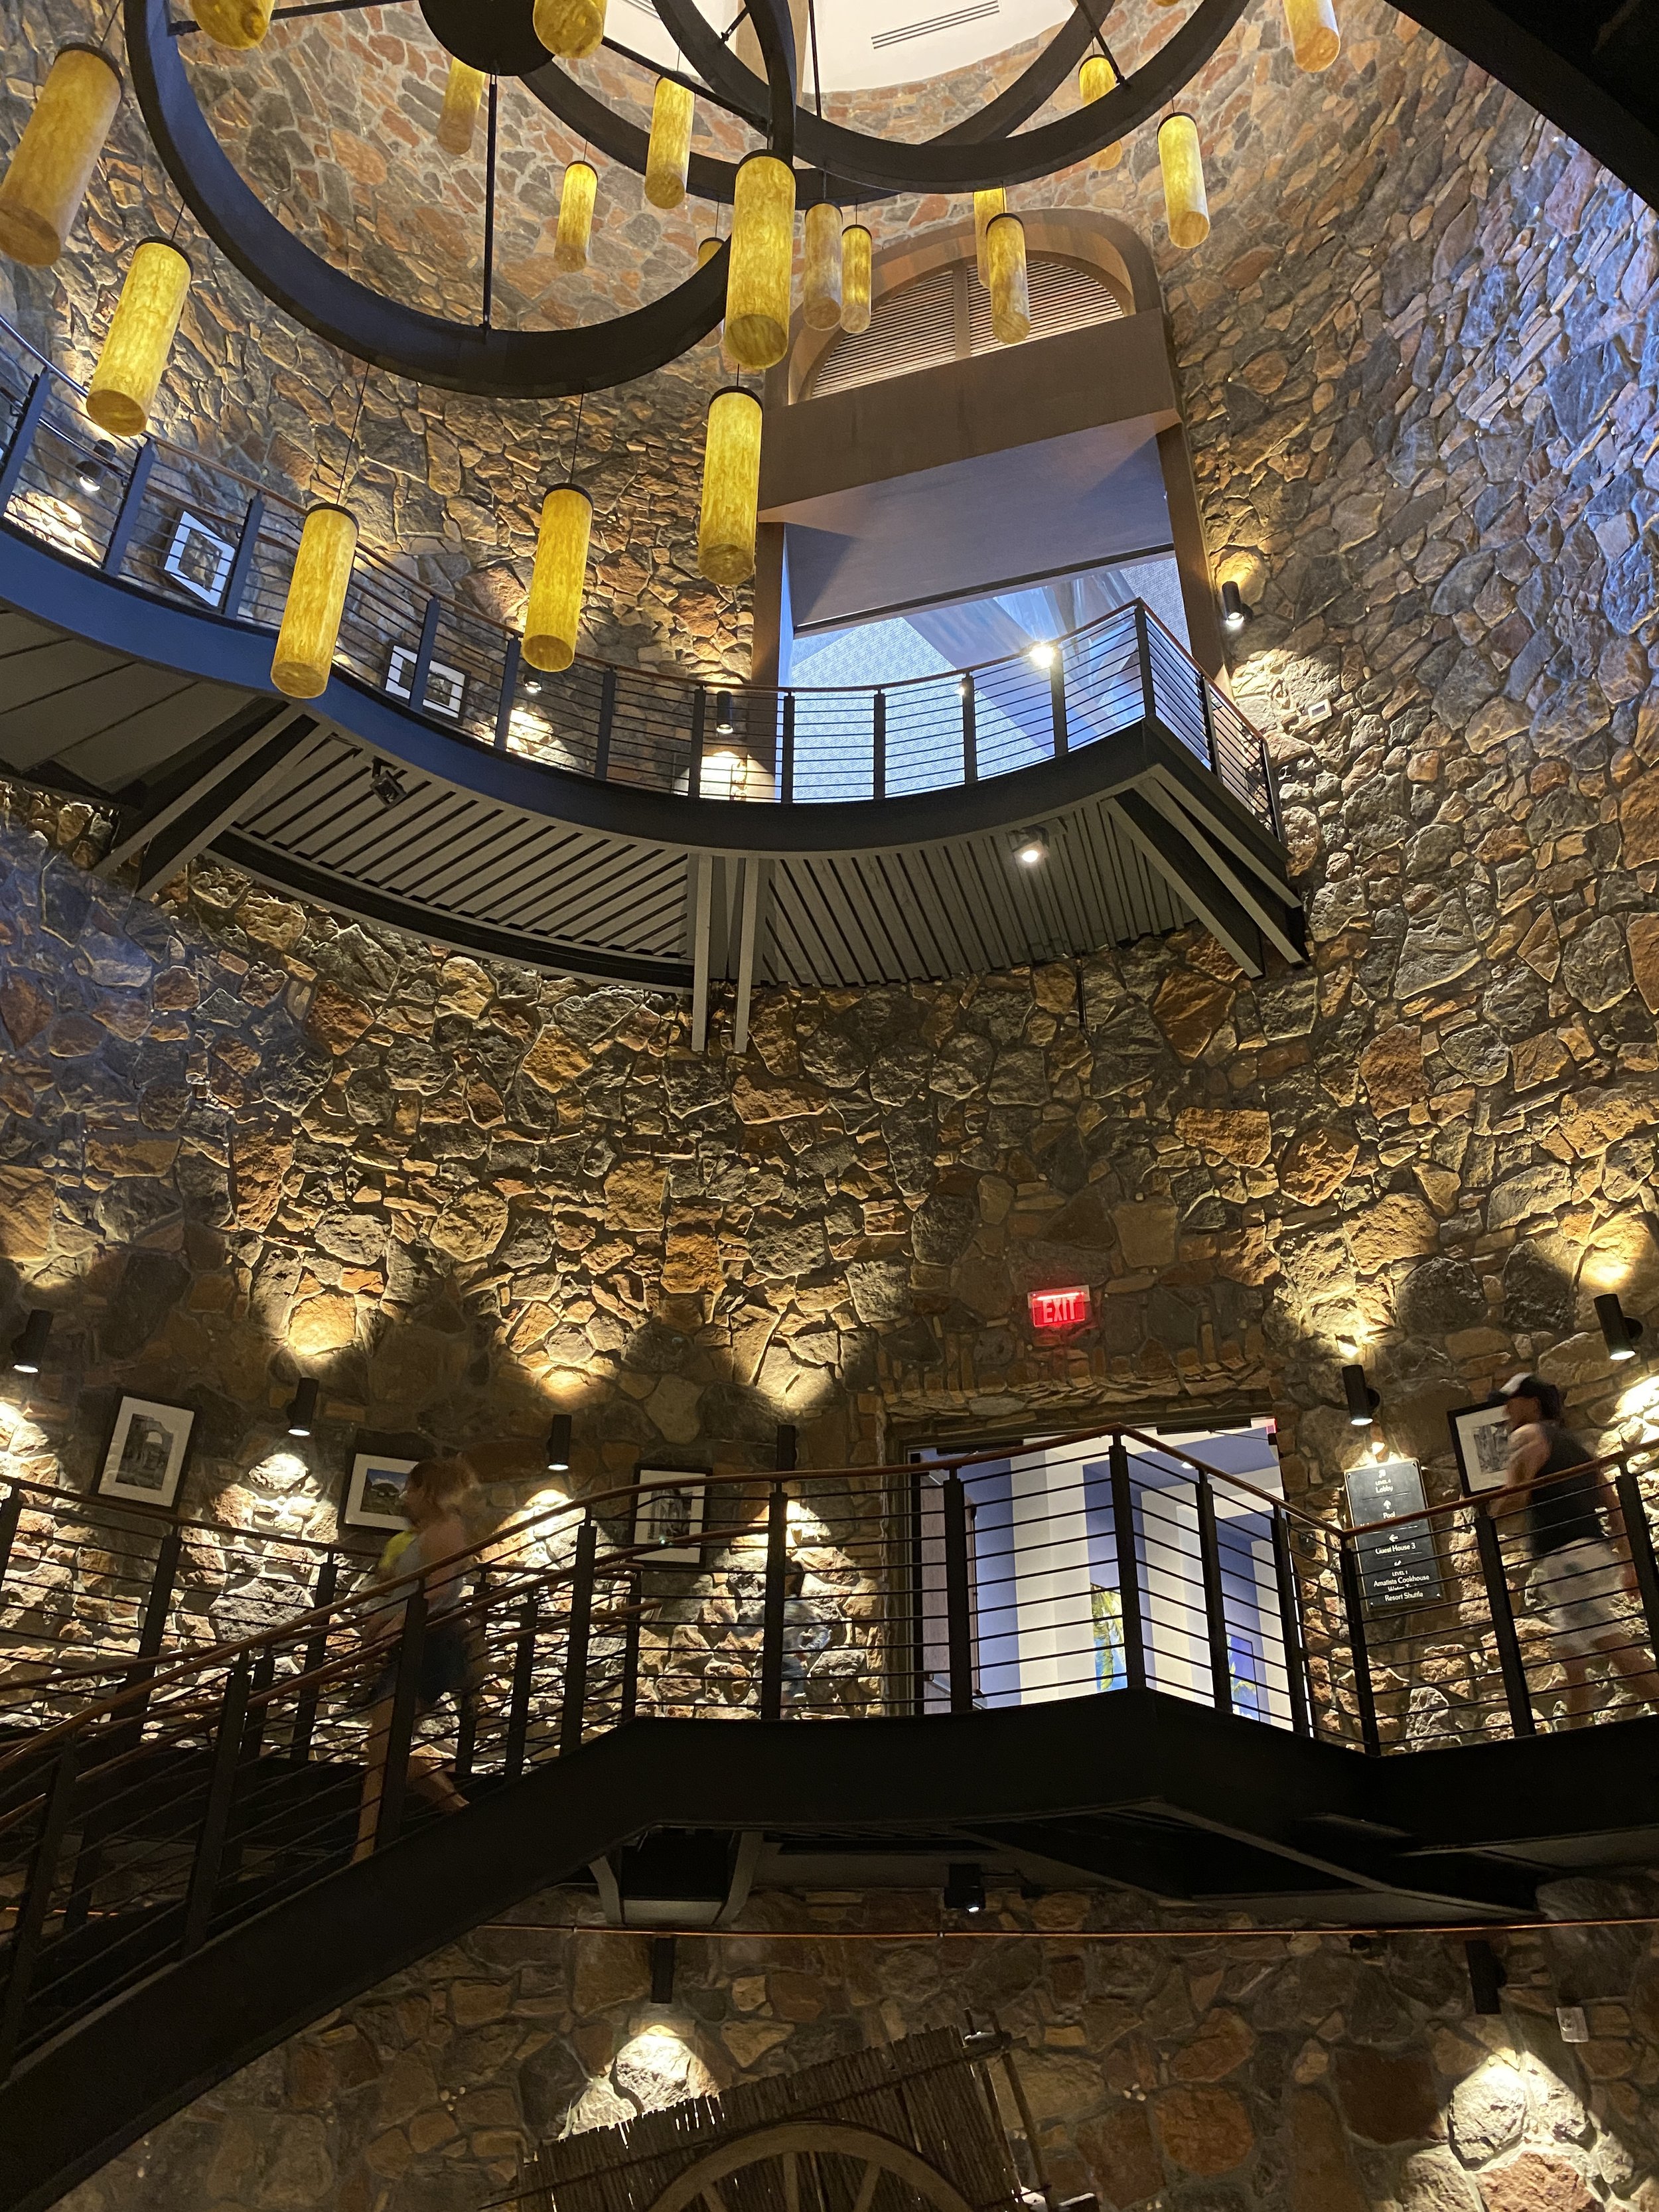  Even though this staircase ties in with the Caribbean theme of the hotel, to me it feels like it belongs in a Harry Potter movie.   